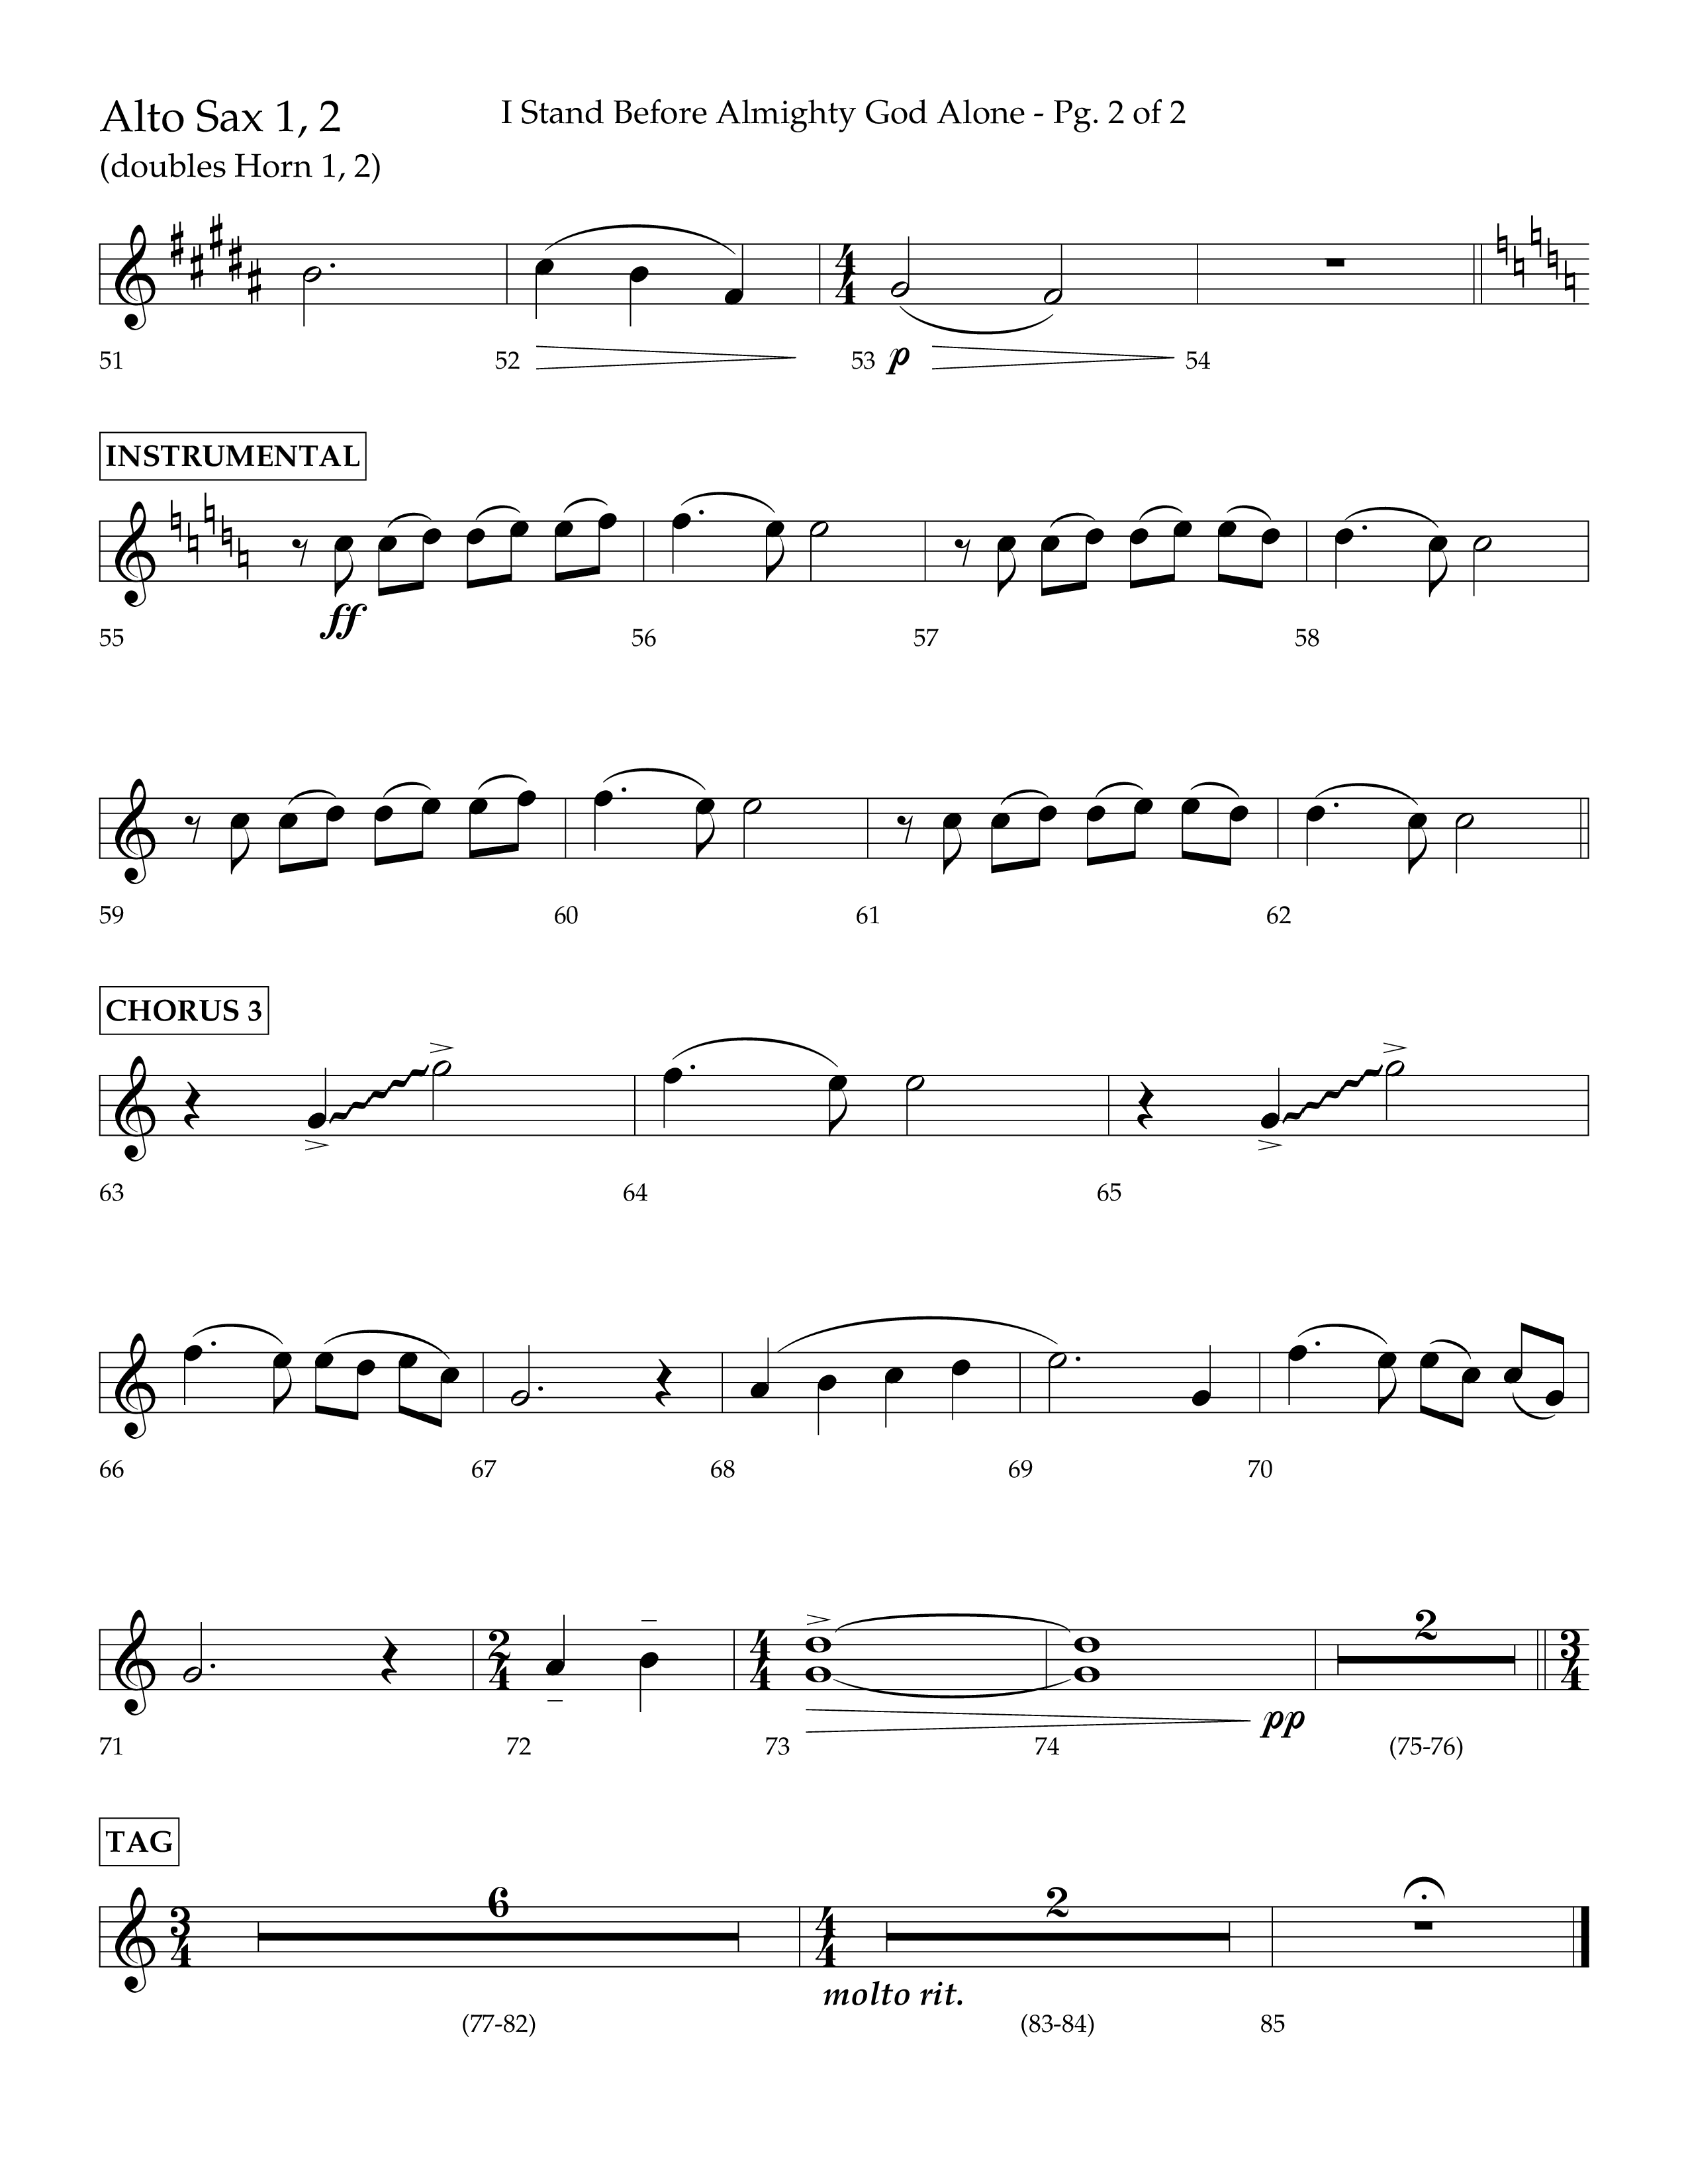 I Stand Before Almighty God Alone (Choral Anthem SATB) Alto Sax 1/2 (Lifeway Choral / Arr. Craig Adams / Orch. Phillip Keveren)